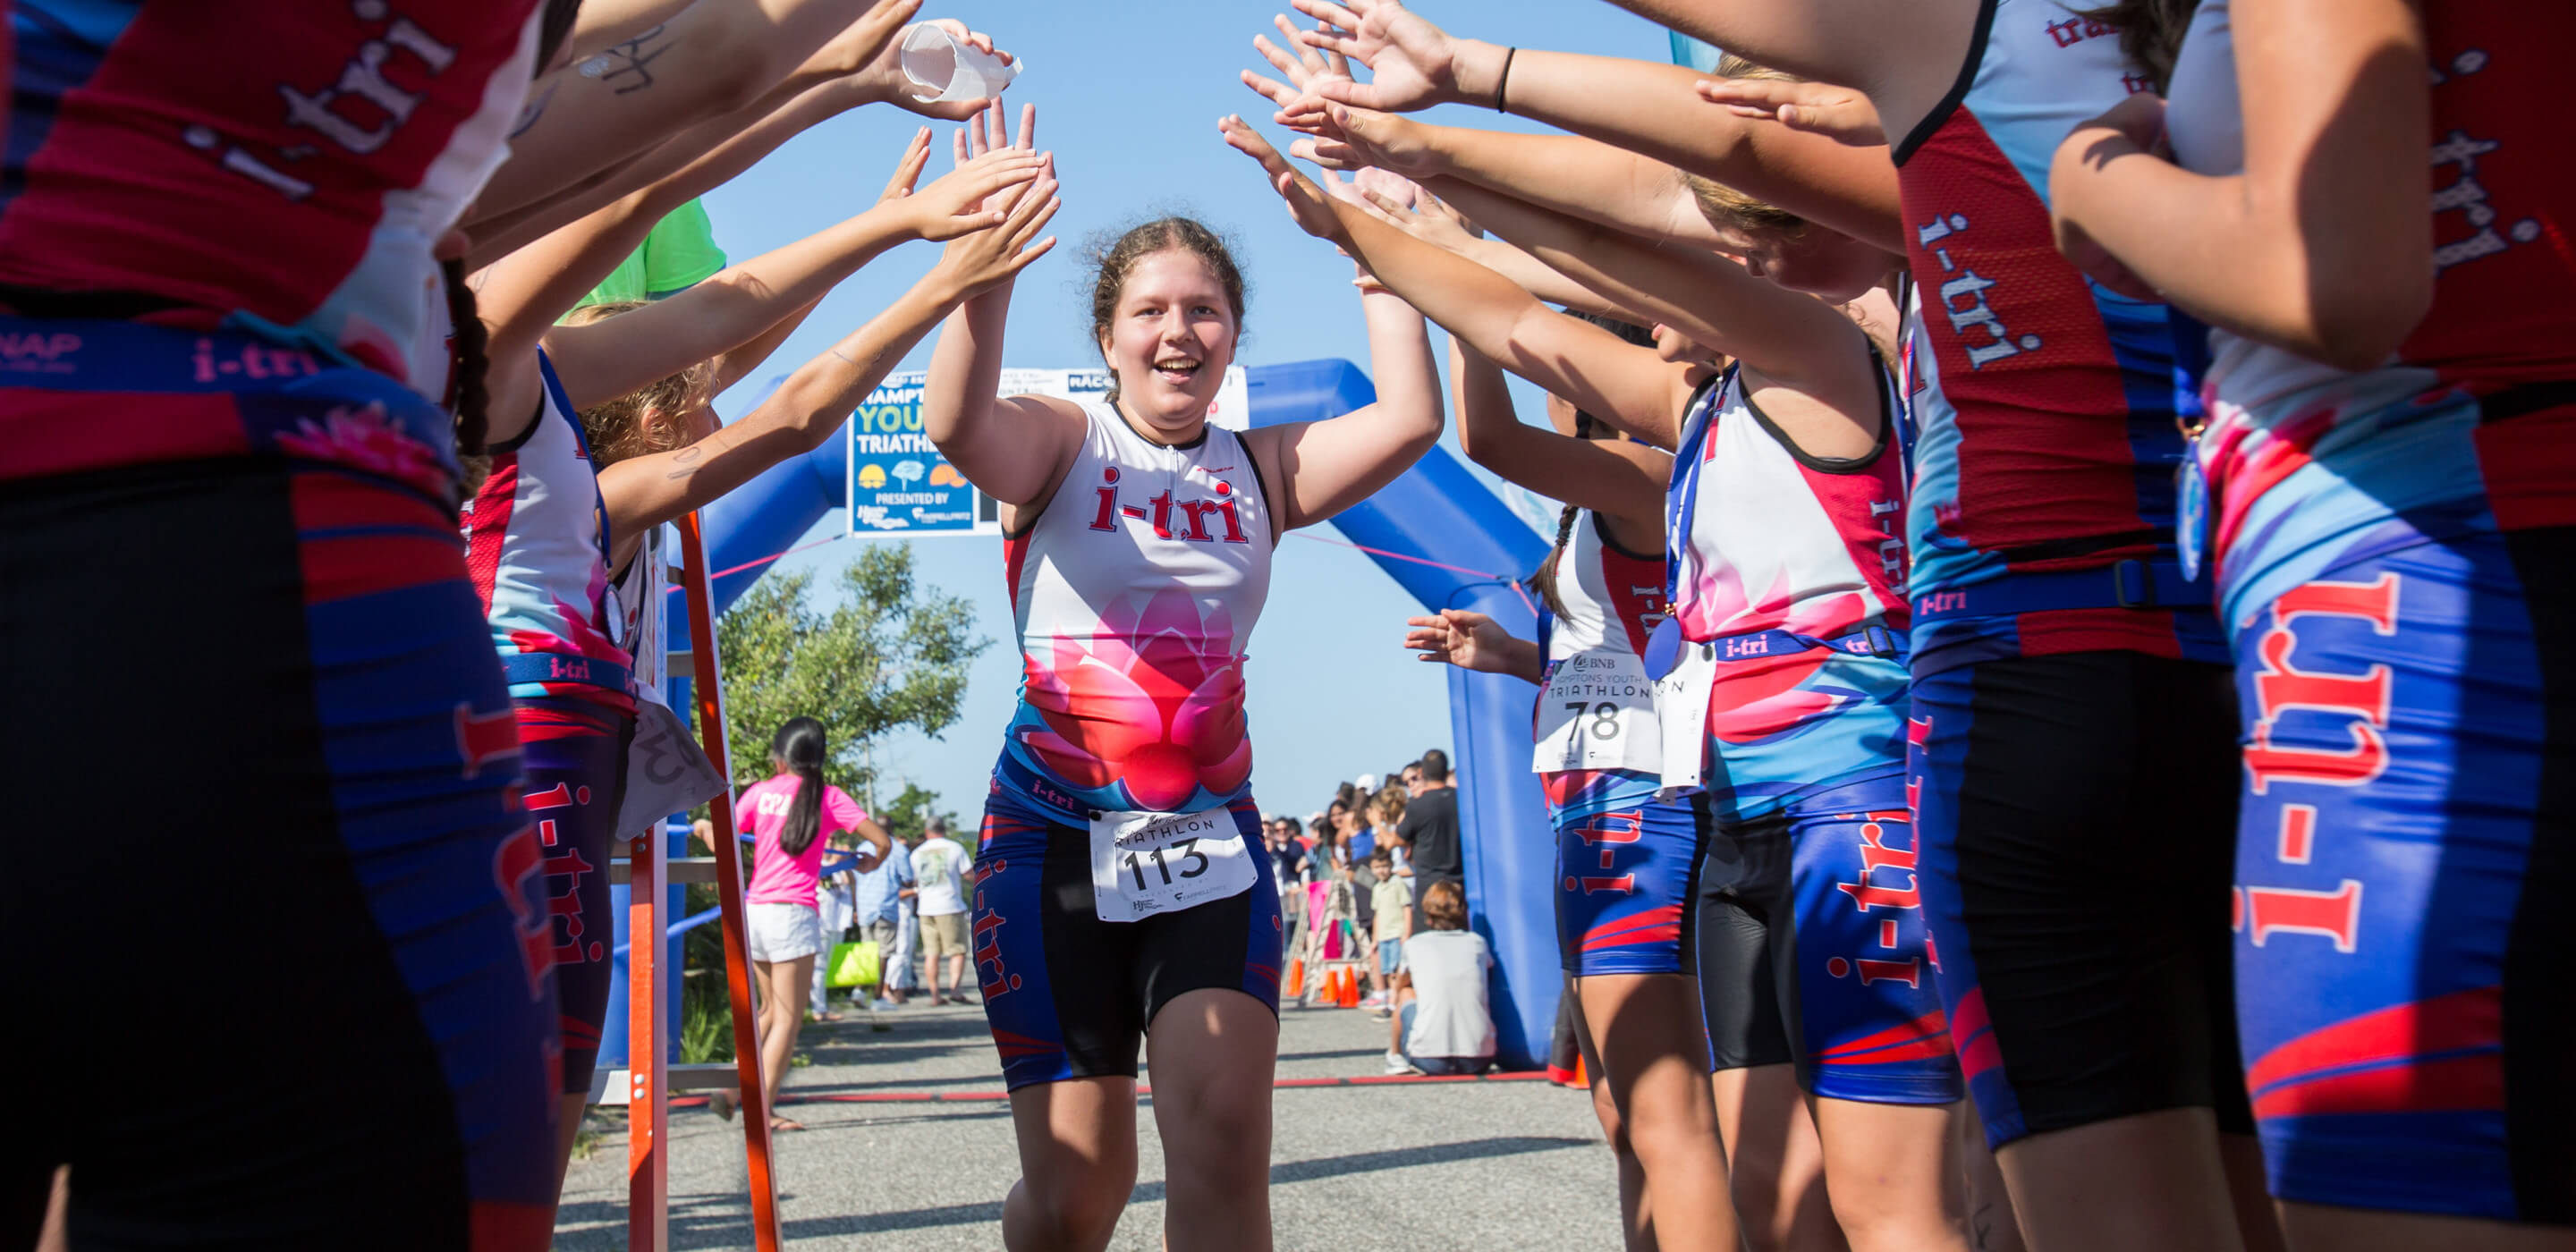 Girl in i-tri race uniform runs through a line of others giving high-fives